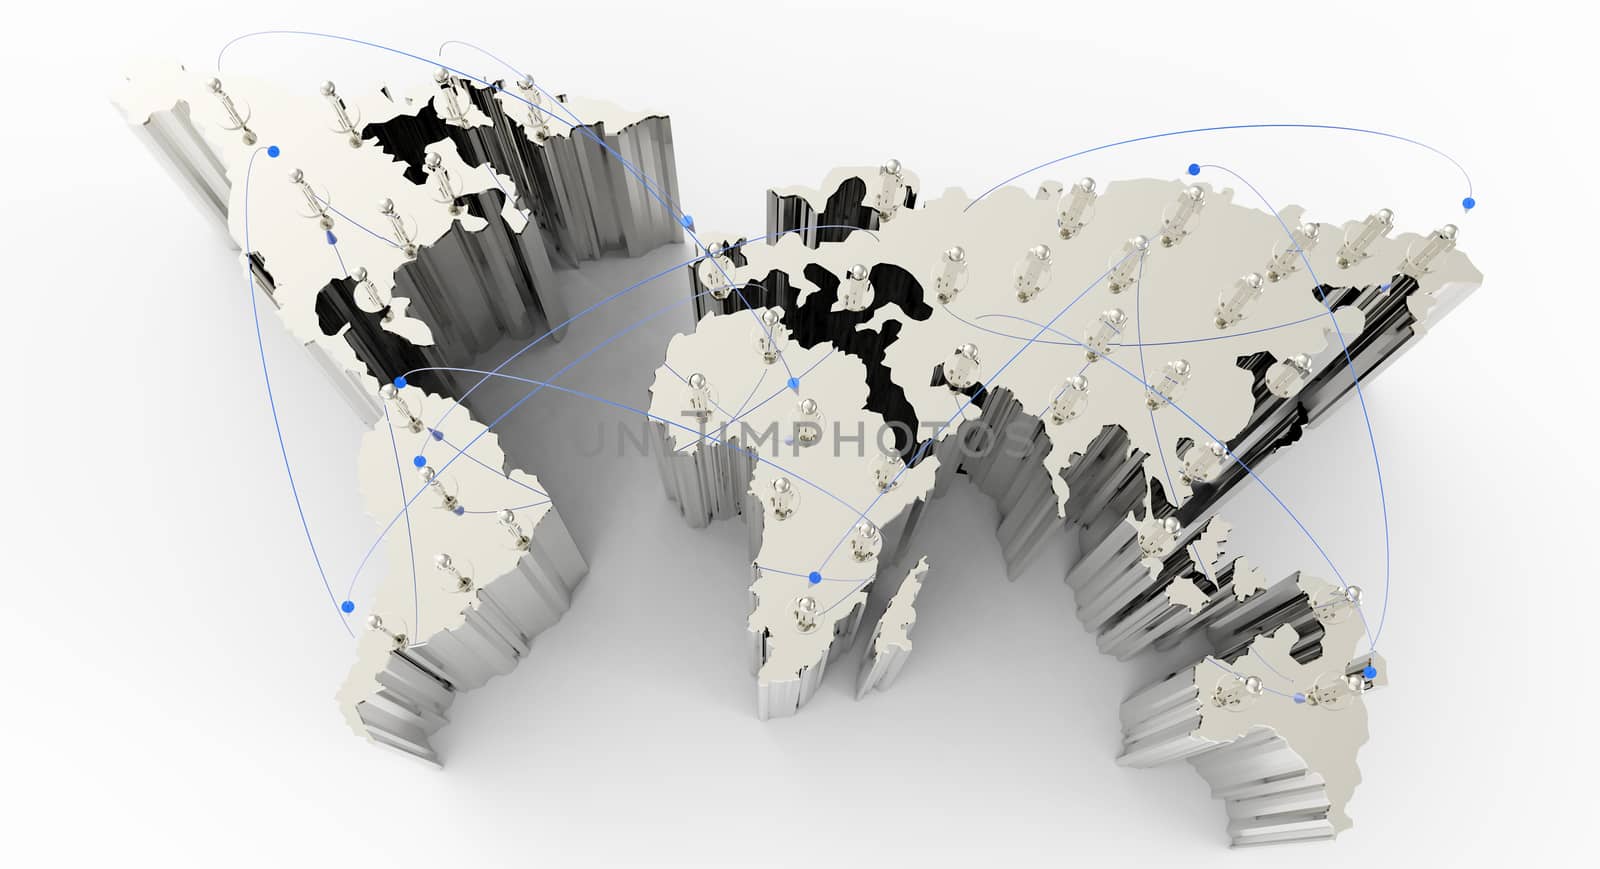 social network human 3d on world map as concept